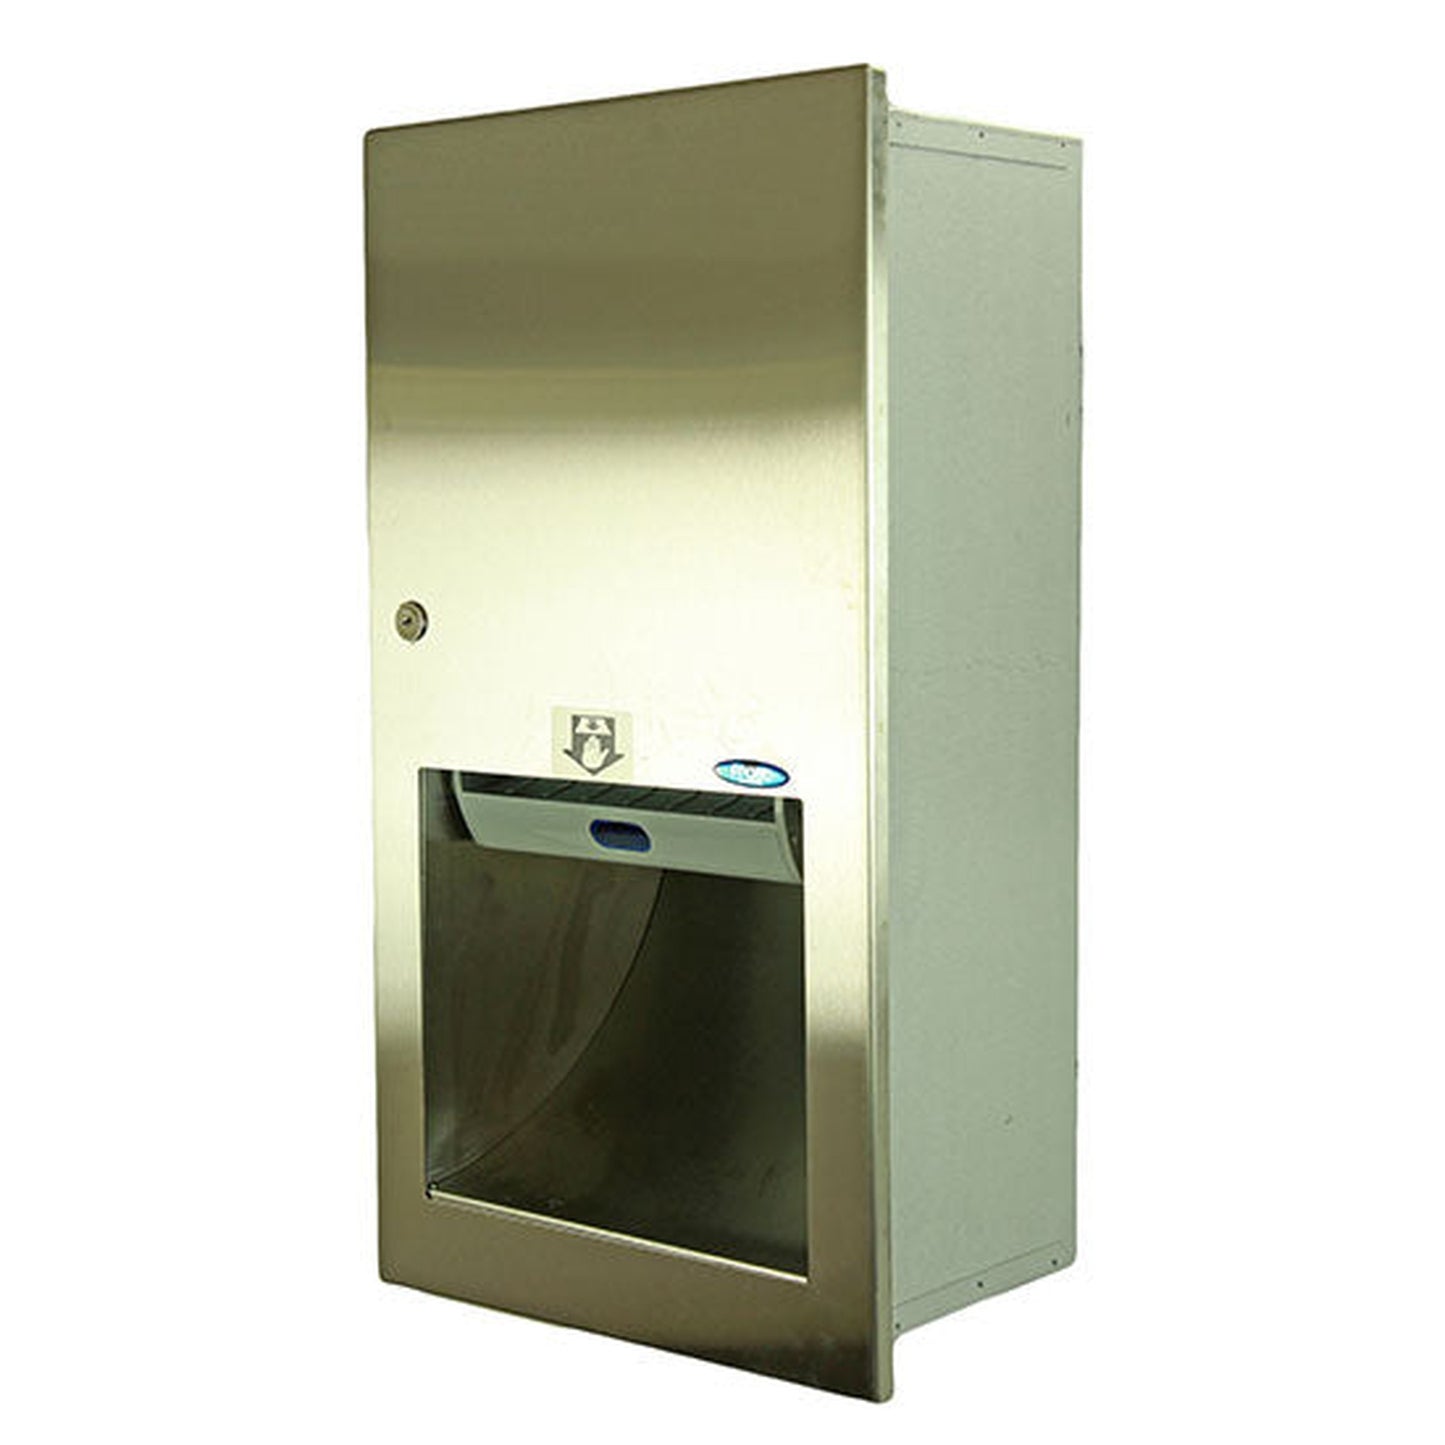 Frost 135-70B Semi Recessed Hands Free Stainless Steel Paper Towel Dispenser